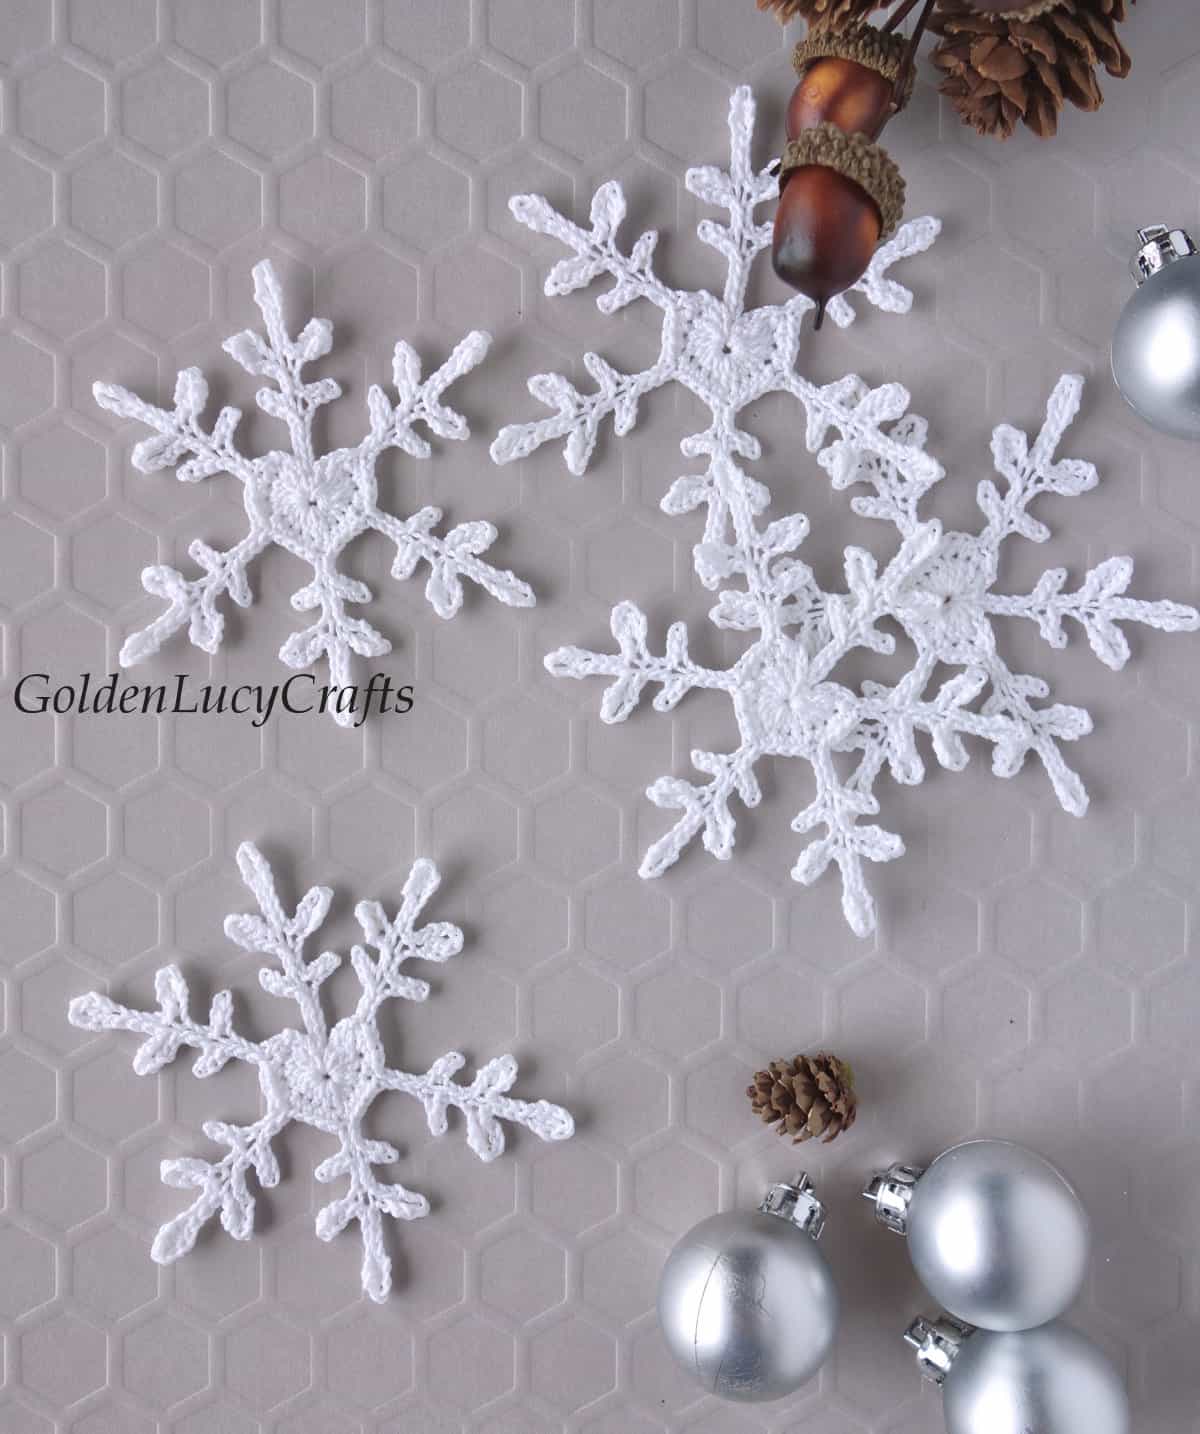 Crochet white snowflakes with heart center, small silver Christmas ball ornaments, small acorns and pinecones